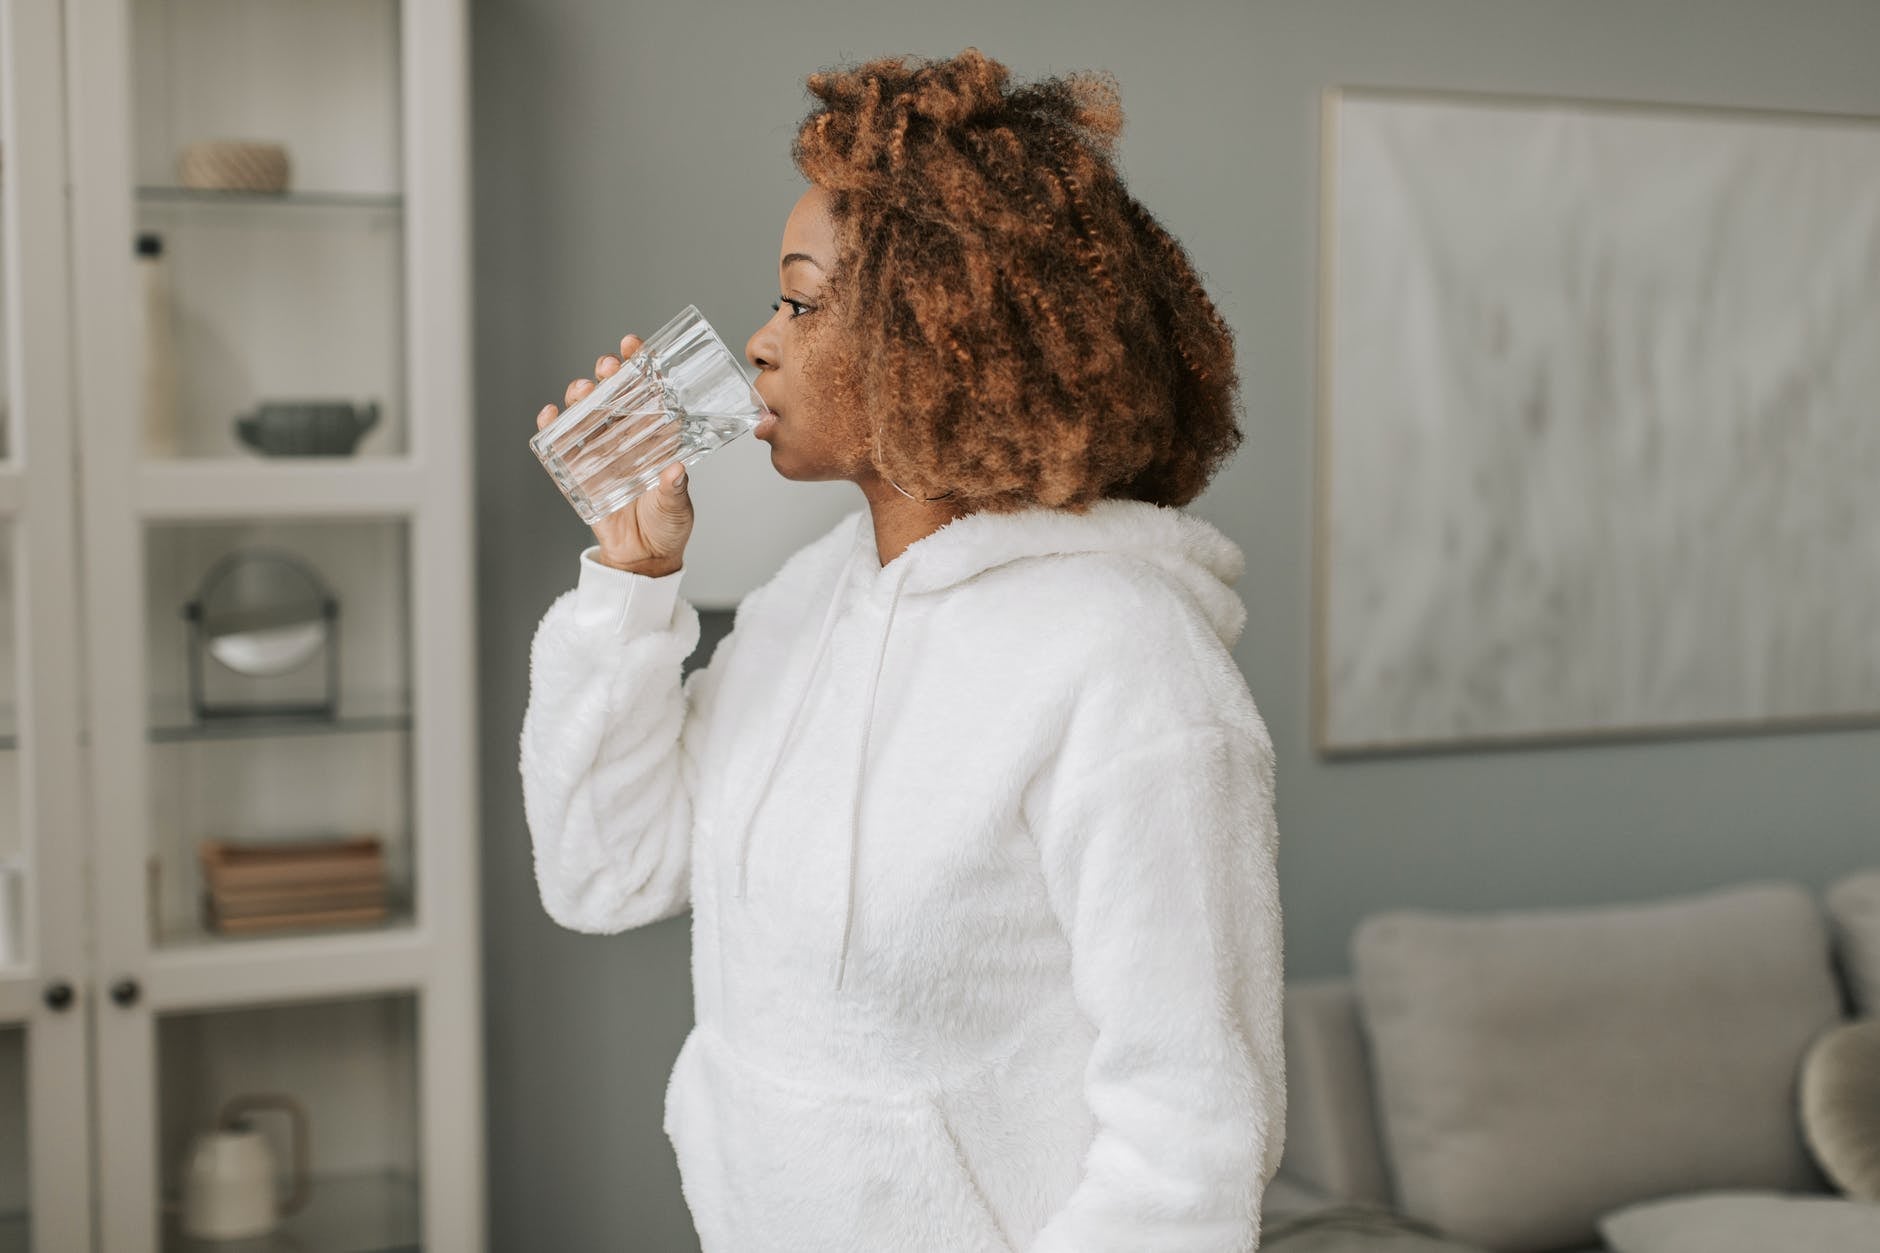 A woman stands in a comfortable sweater as she sips a glass of water, taking care of her well-being